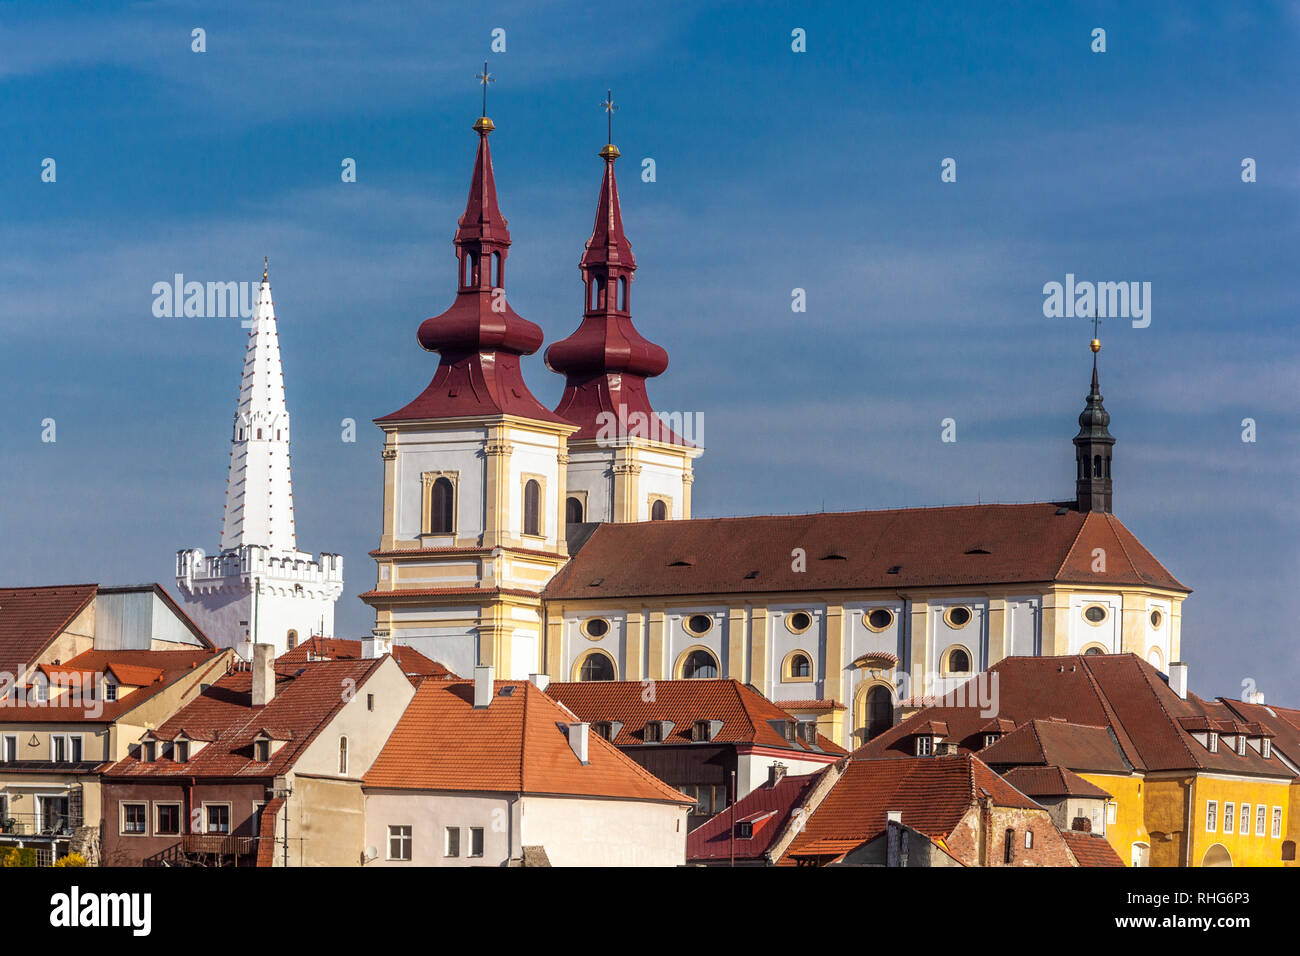 Typical Czech Baroque Church of Elevation of the Holy Cross and White Gothic City Hall Tower, Kadan Czech Republic baroque architecture Stock Photo